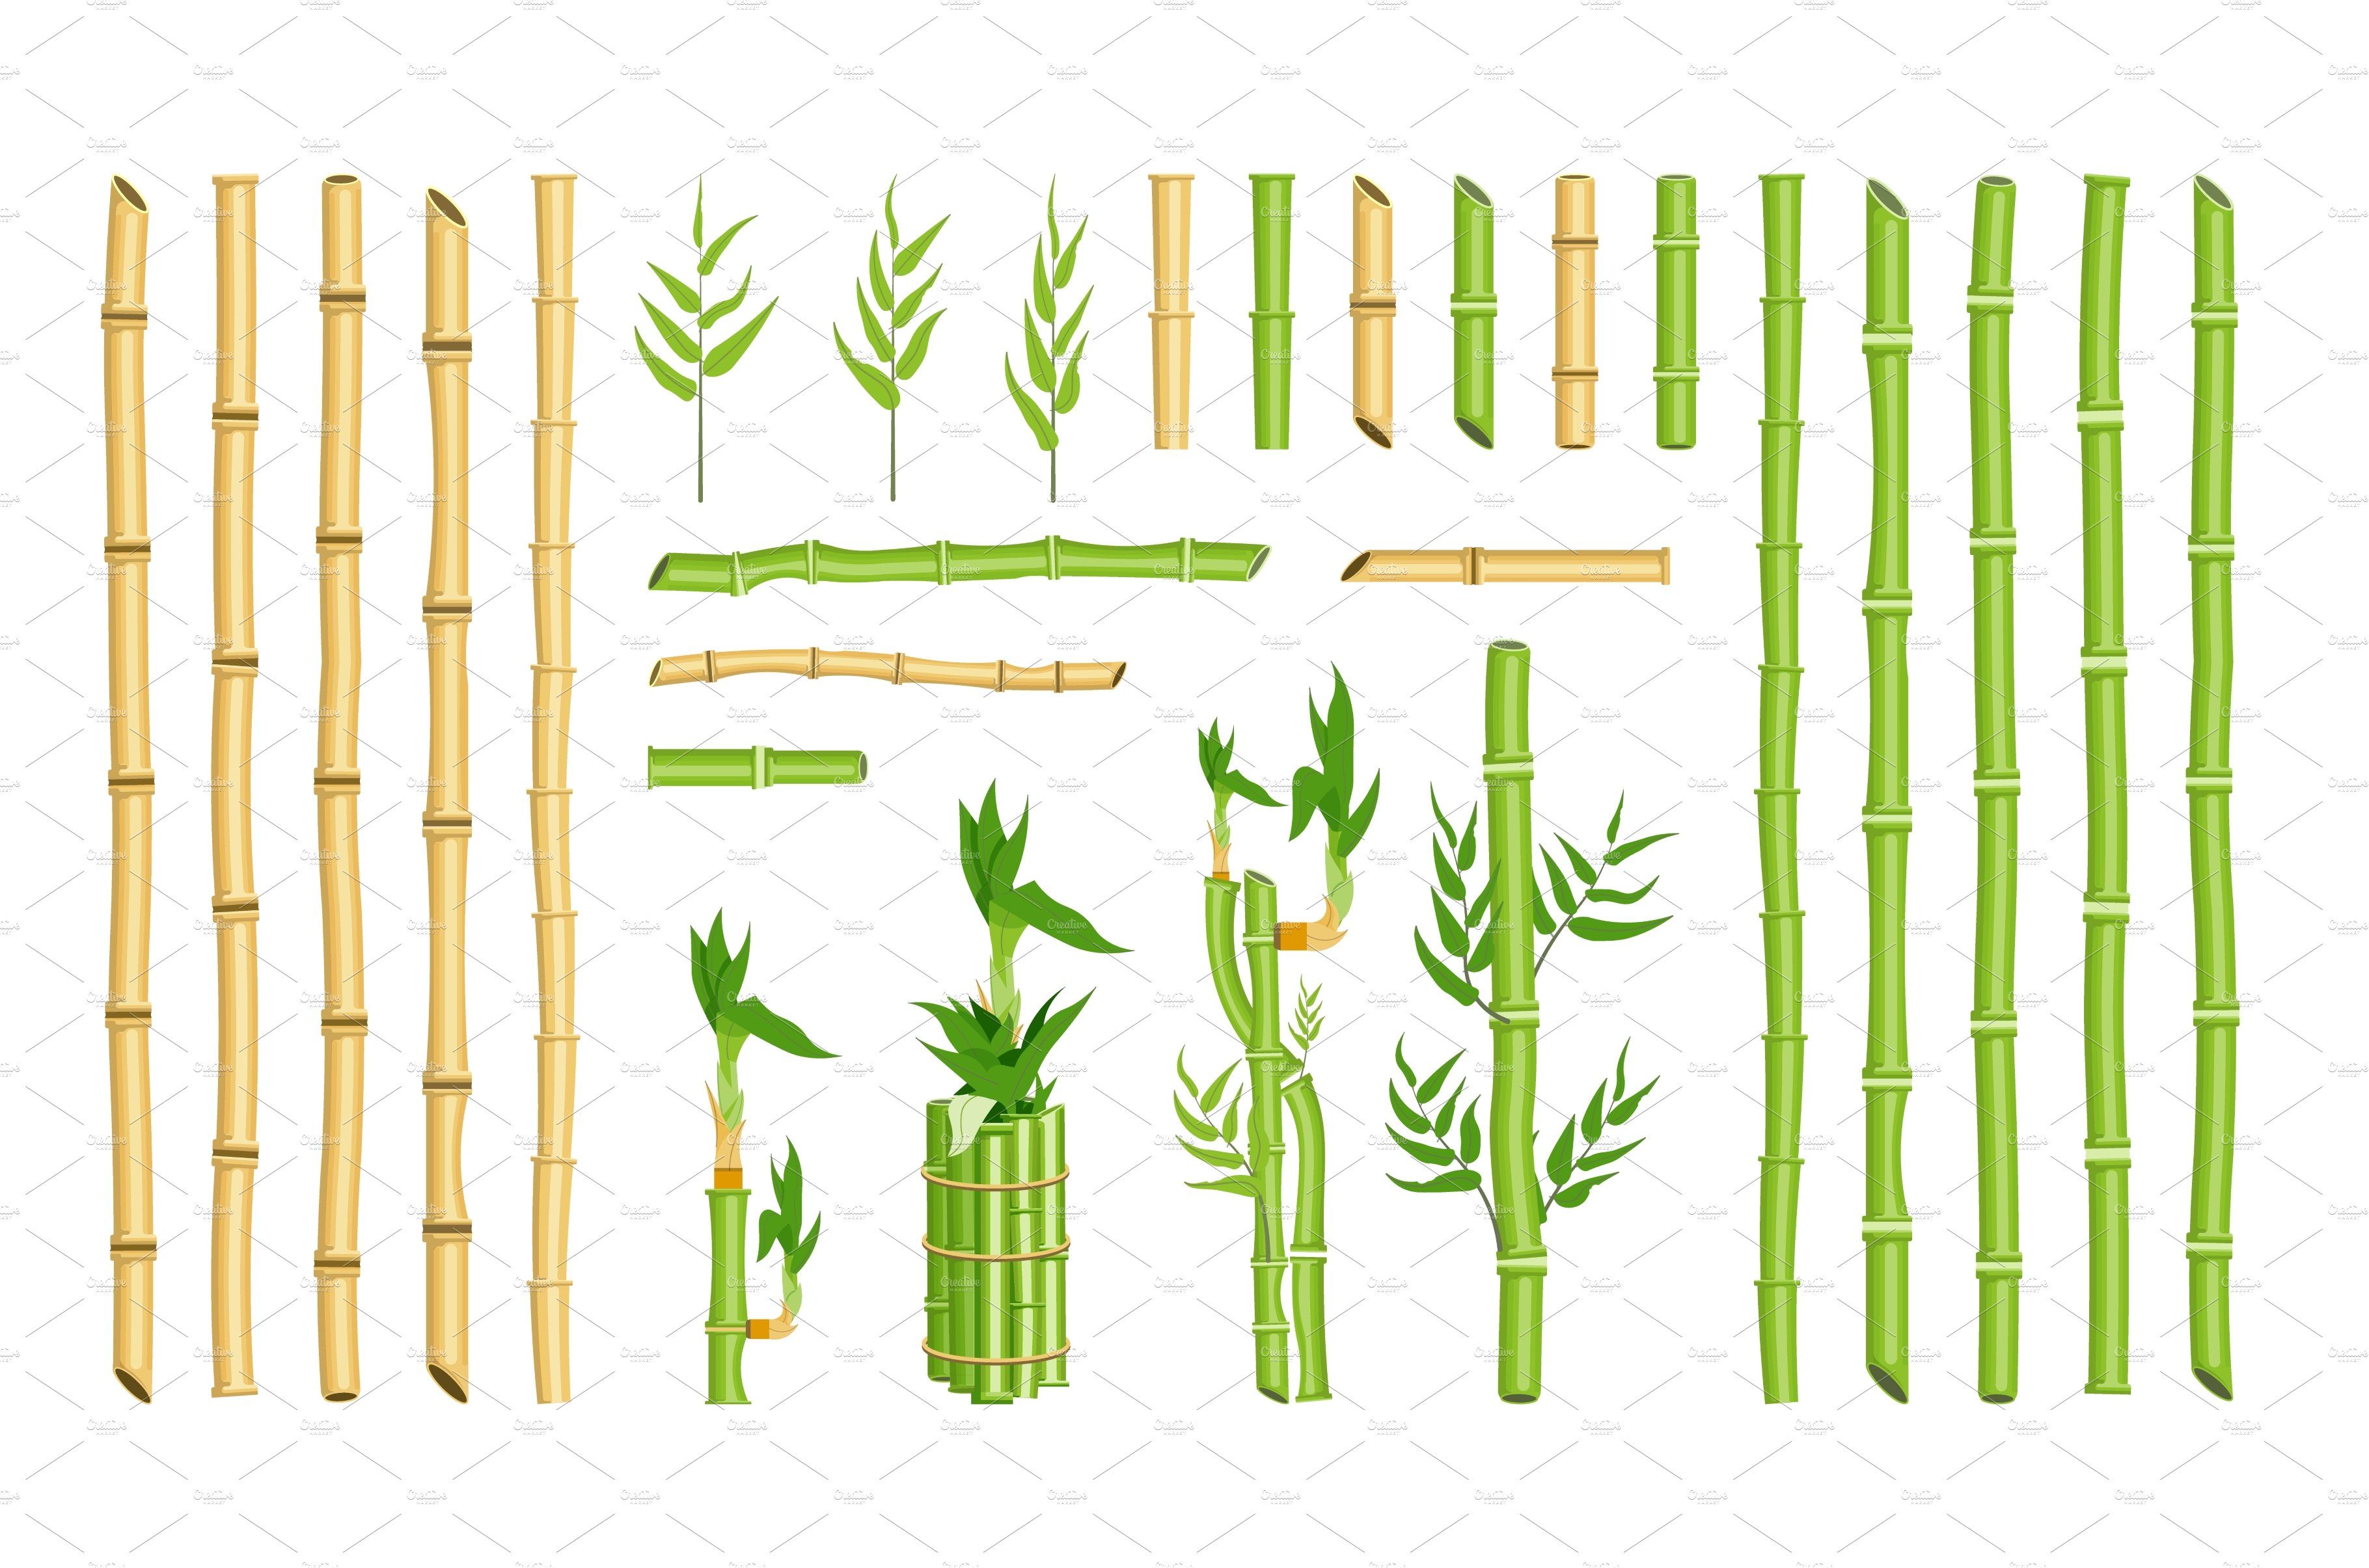 Set of different types of bamboo sticks.